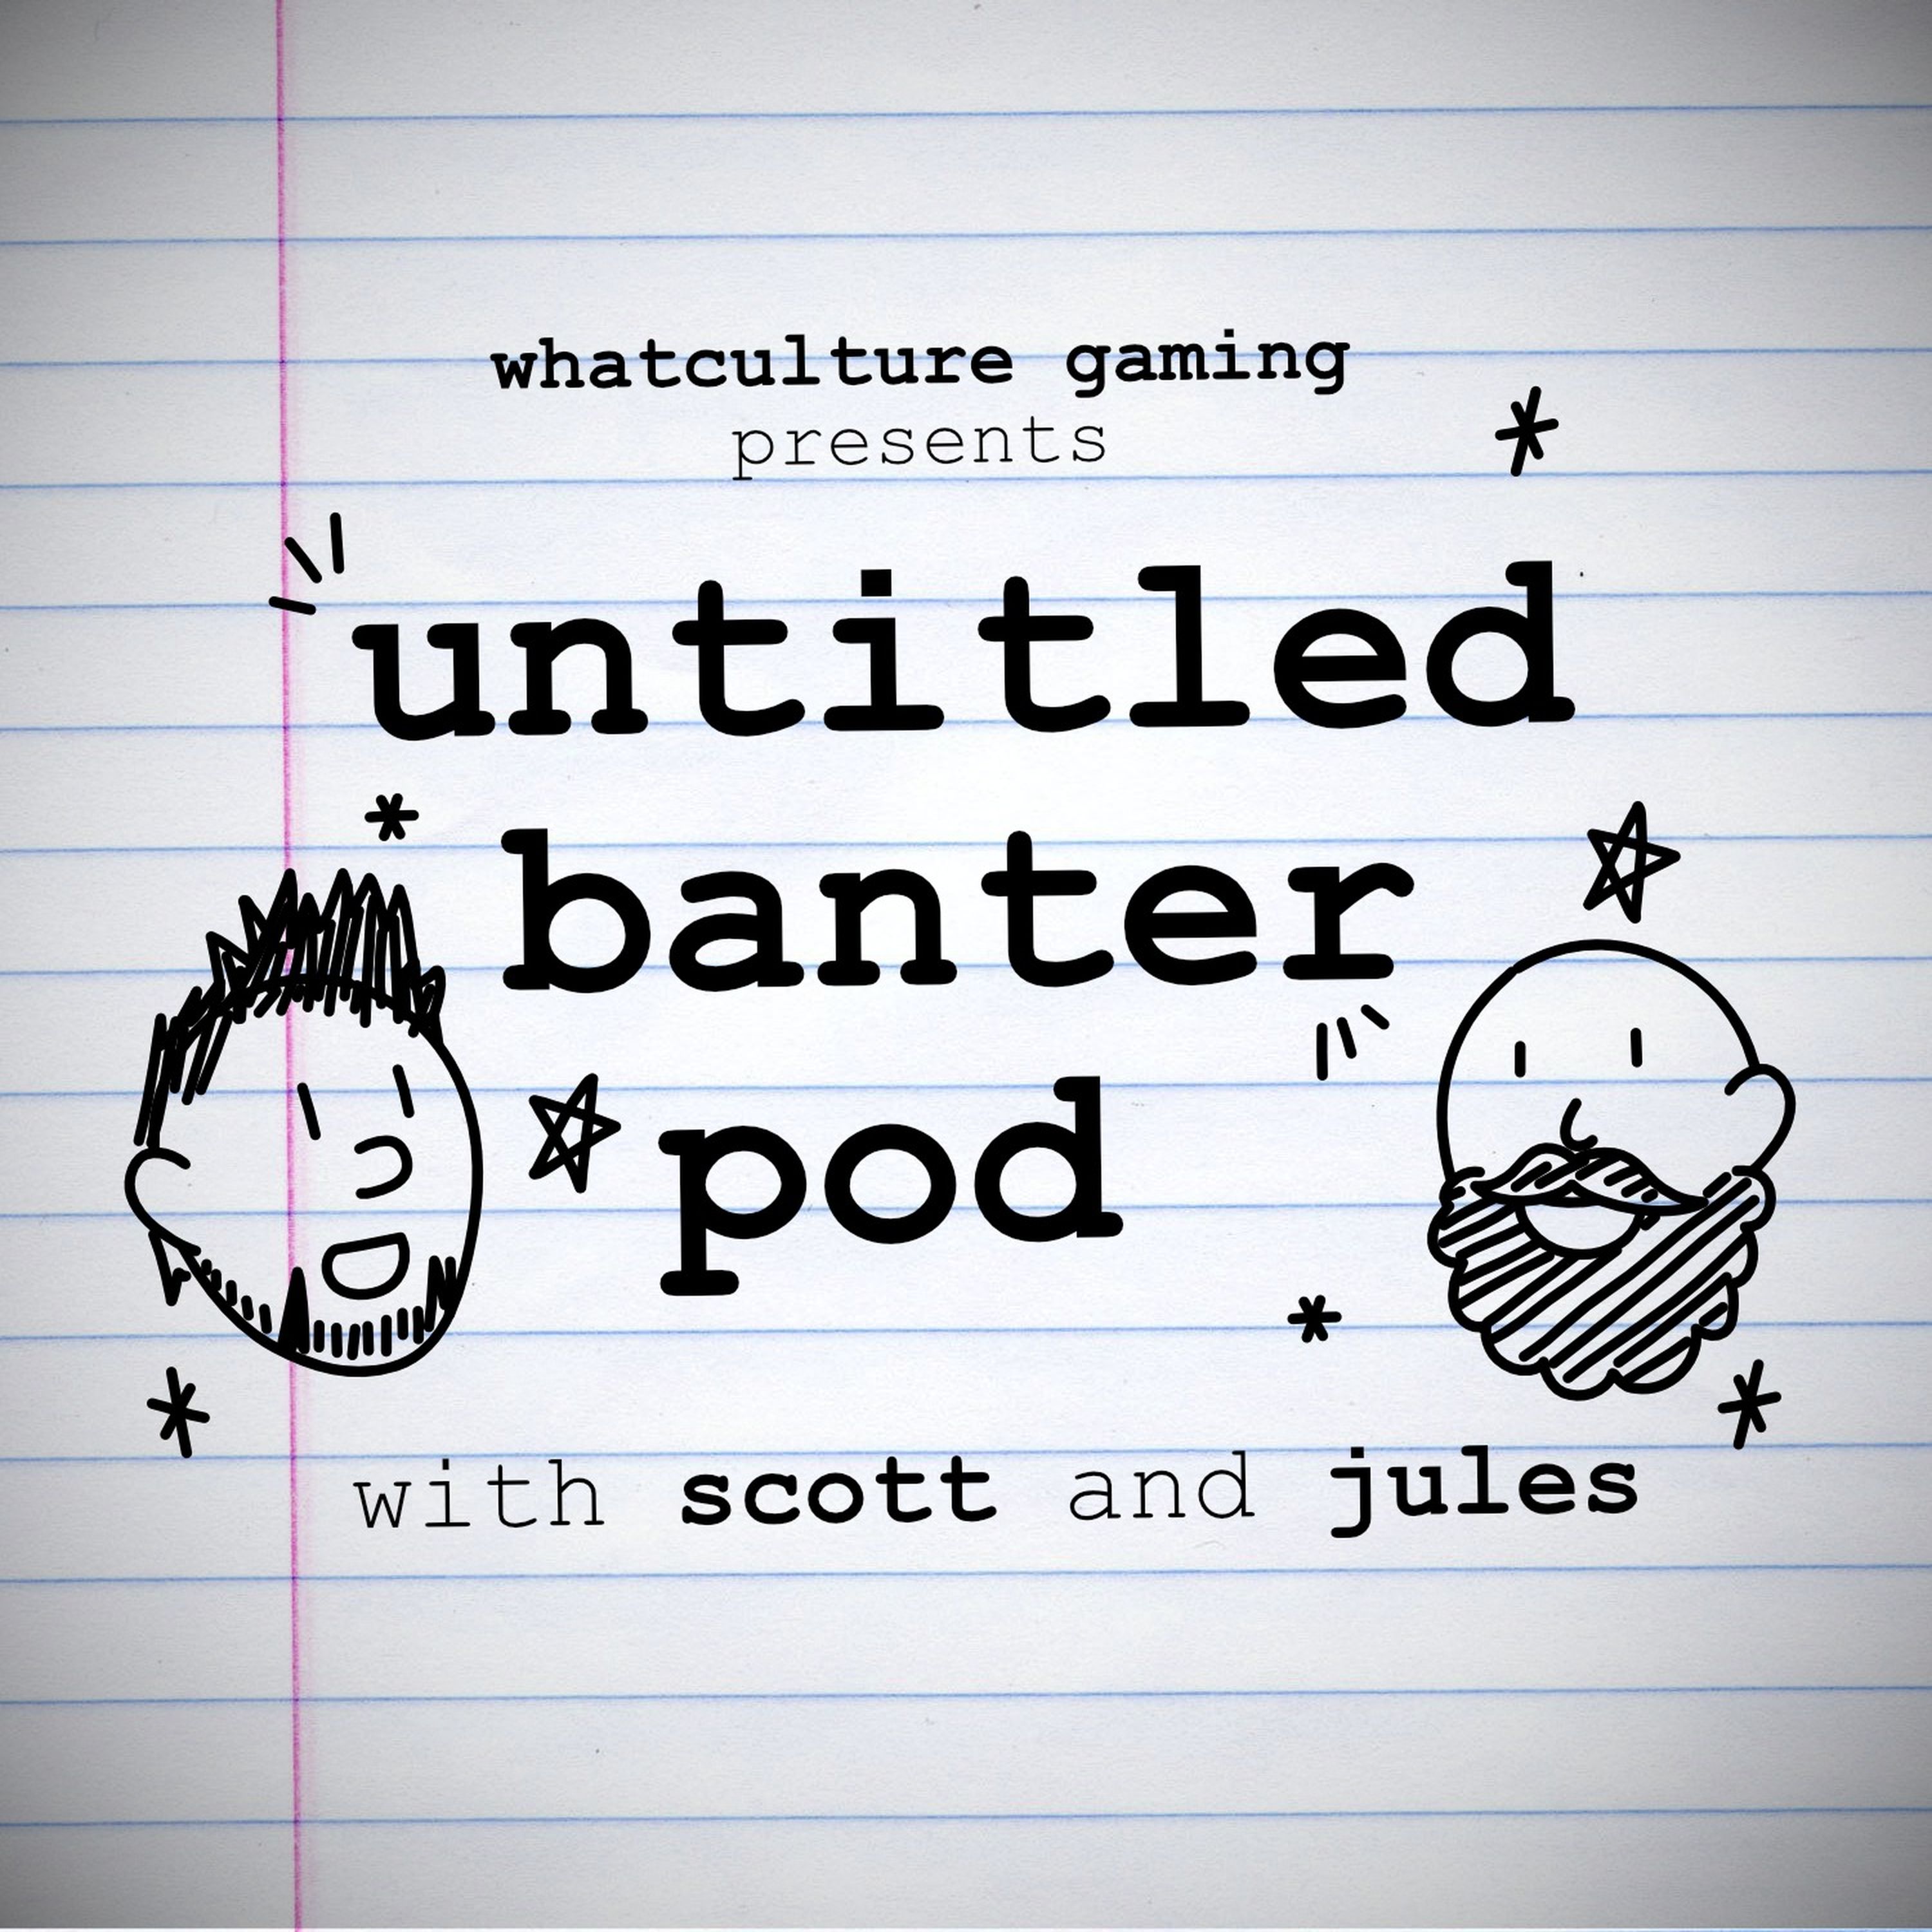 Are Release Day Reviews Actually Pointless? – Untitled Banter Pod #UBP